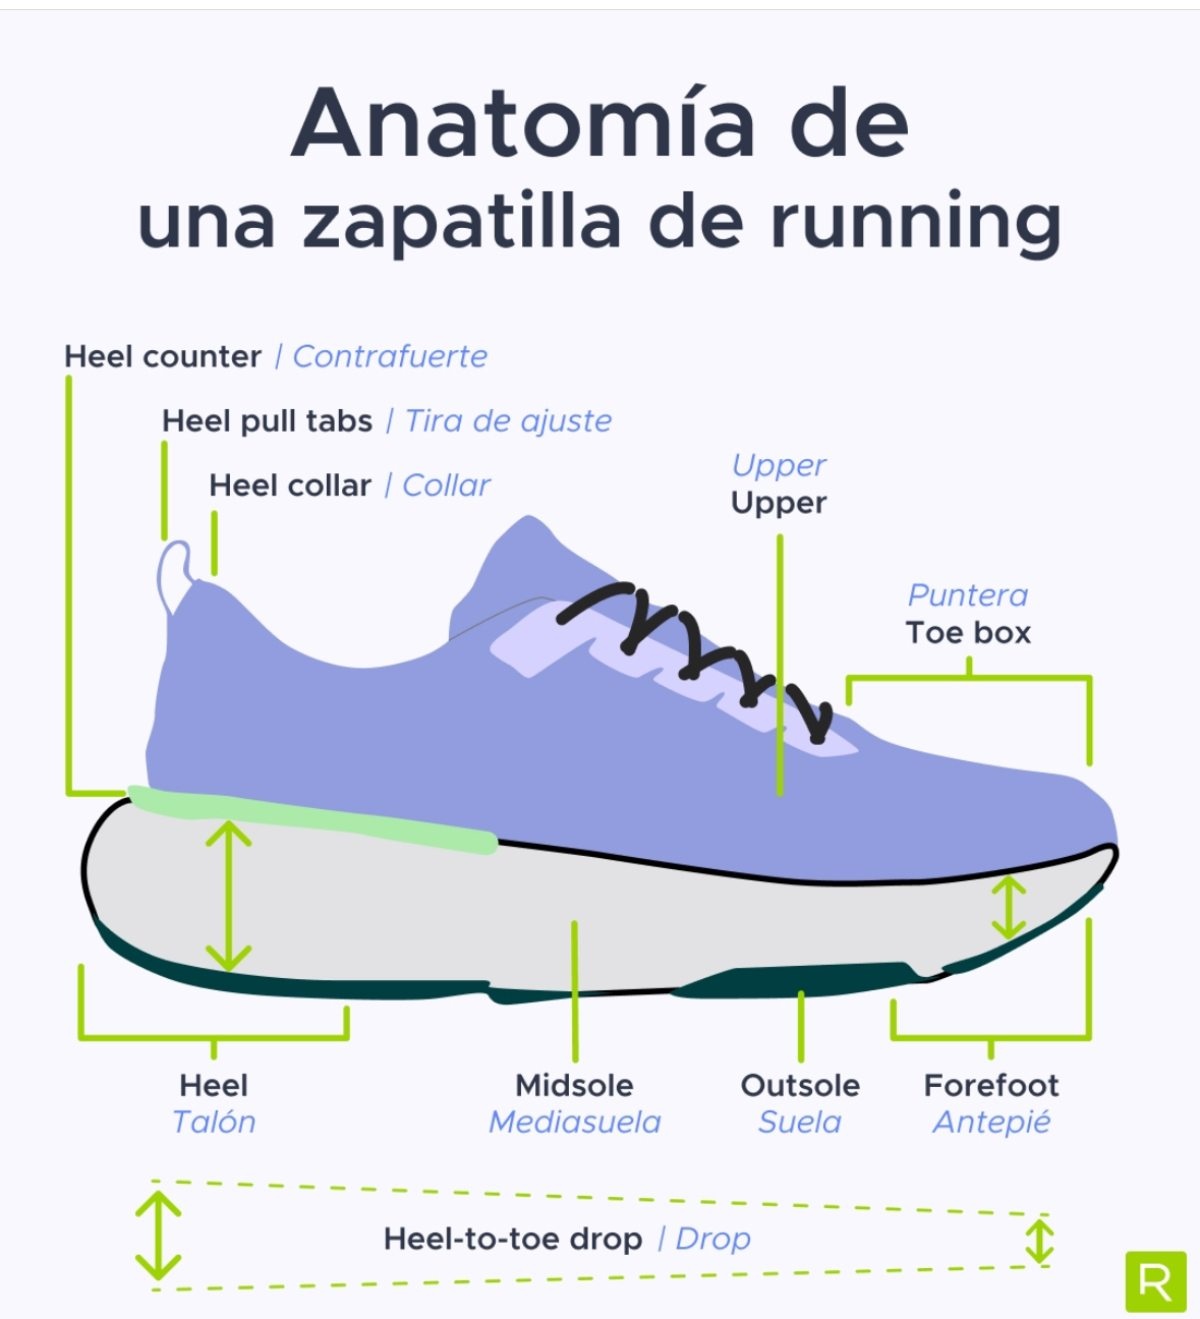 Anatomy of a running shoe: Guide to know what is important when choosing a model or another